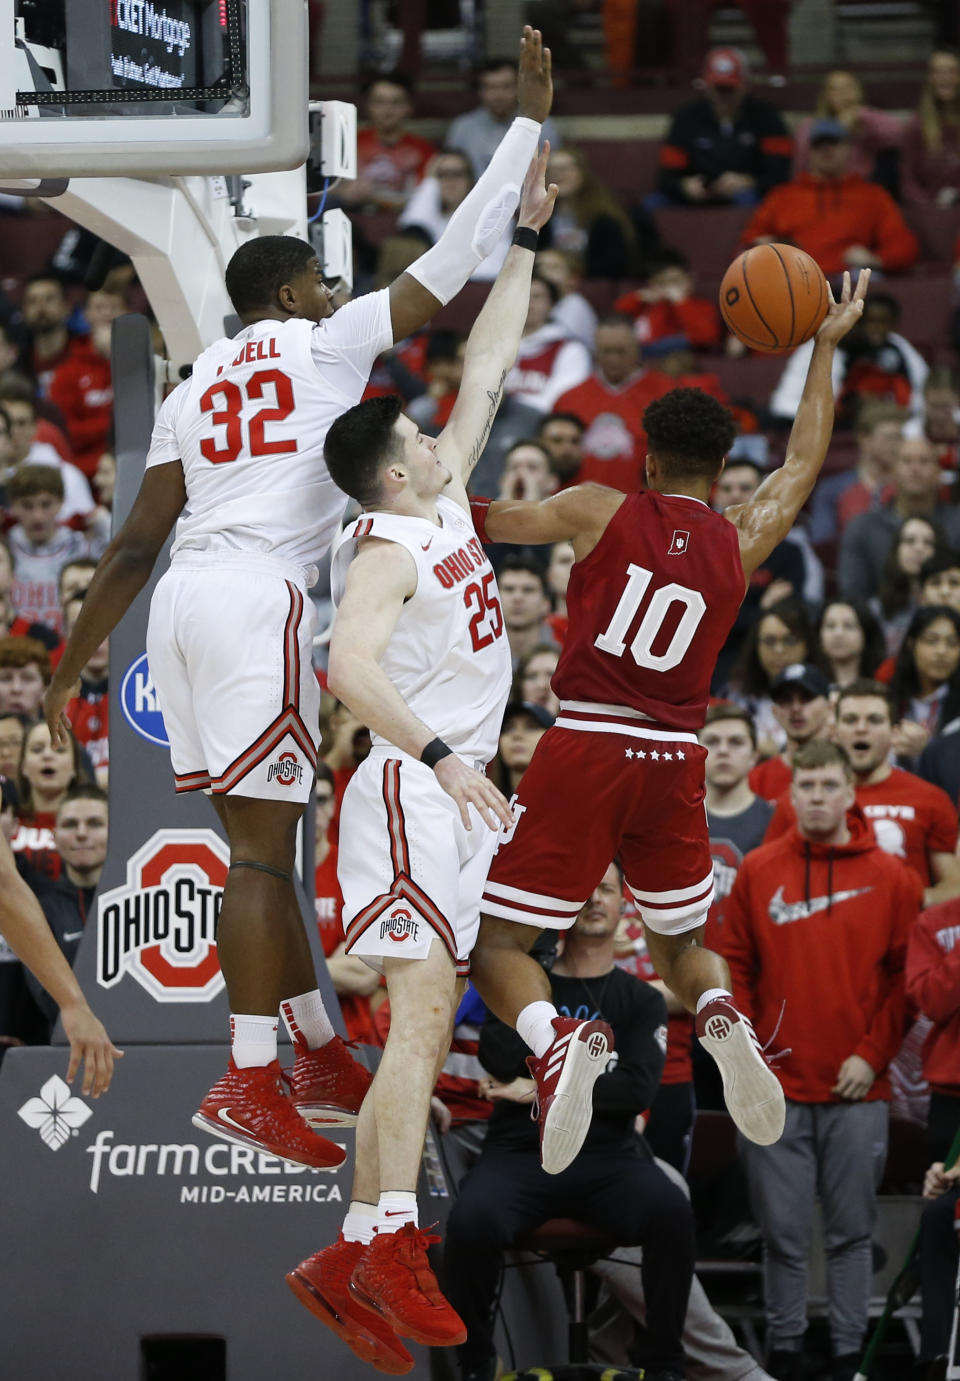 Indiana's Rob Phinisee, right, tries to shoot over Ohio State's E.J. Liddell, left, and Kyle Young during the second half of an NCAA college basketball game Saturday, Feb. 1, 2020, in Columbus, Ohio. Ohio State beat Indiana 68-59. (AP Photo/Jay LaPrete)